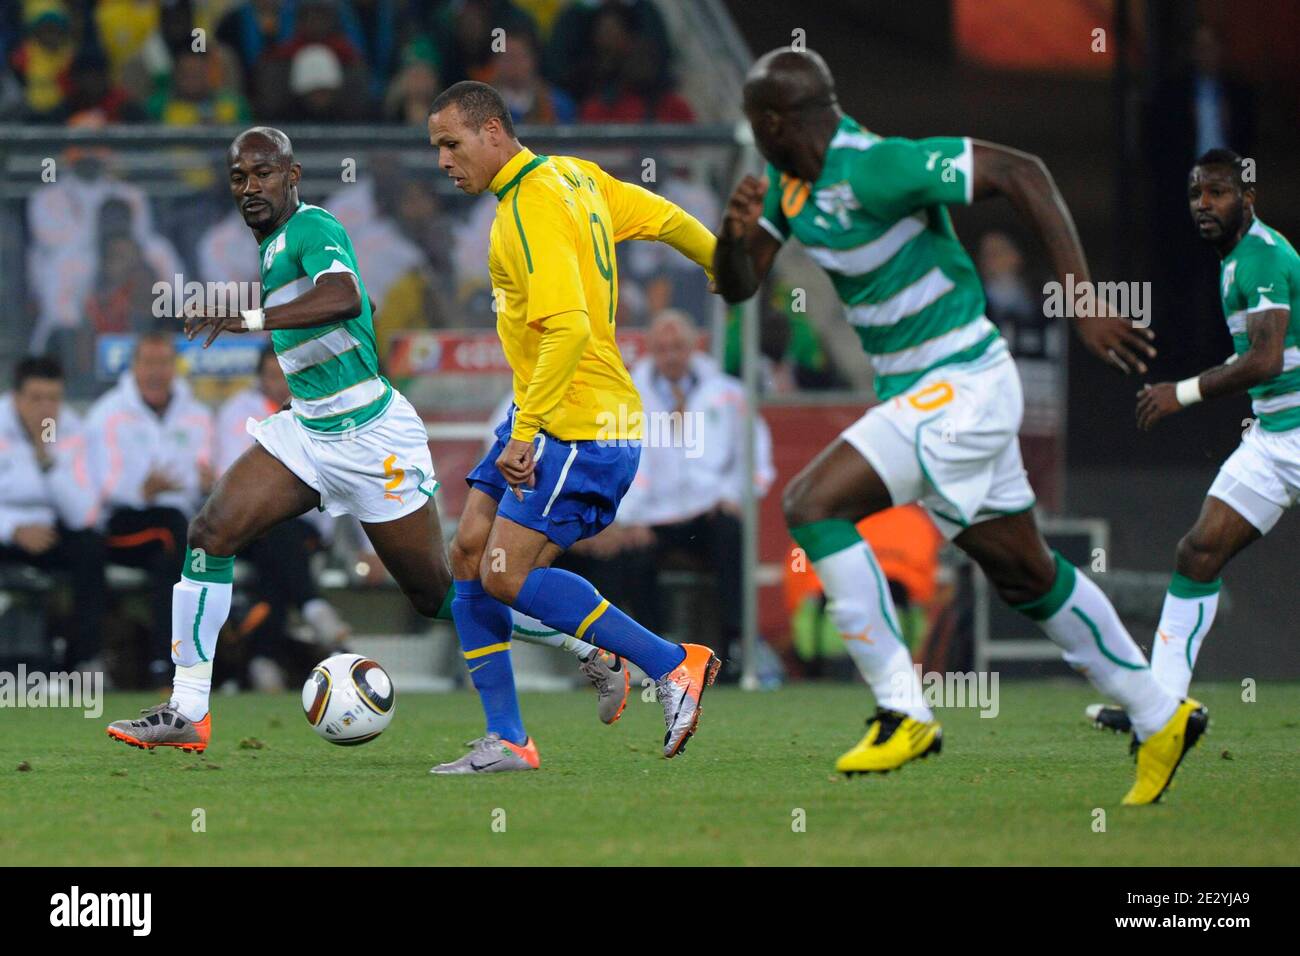 Brazil's Luis Fabiano during the 2010 FIFA World Cup South Africa Soccer match, group G, Brazil vs Ivory Coast at Soccer City football stadium in Johannesburg, South Africa on June 20, 2010. Brazil won 3-1. Photo by Henri Szwarc/ABACAPRESS.COM Stock Photo